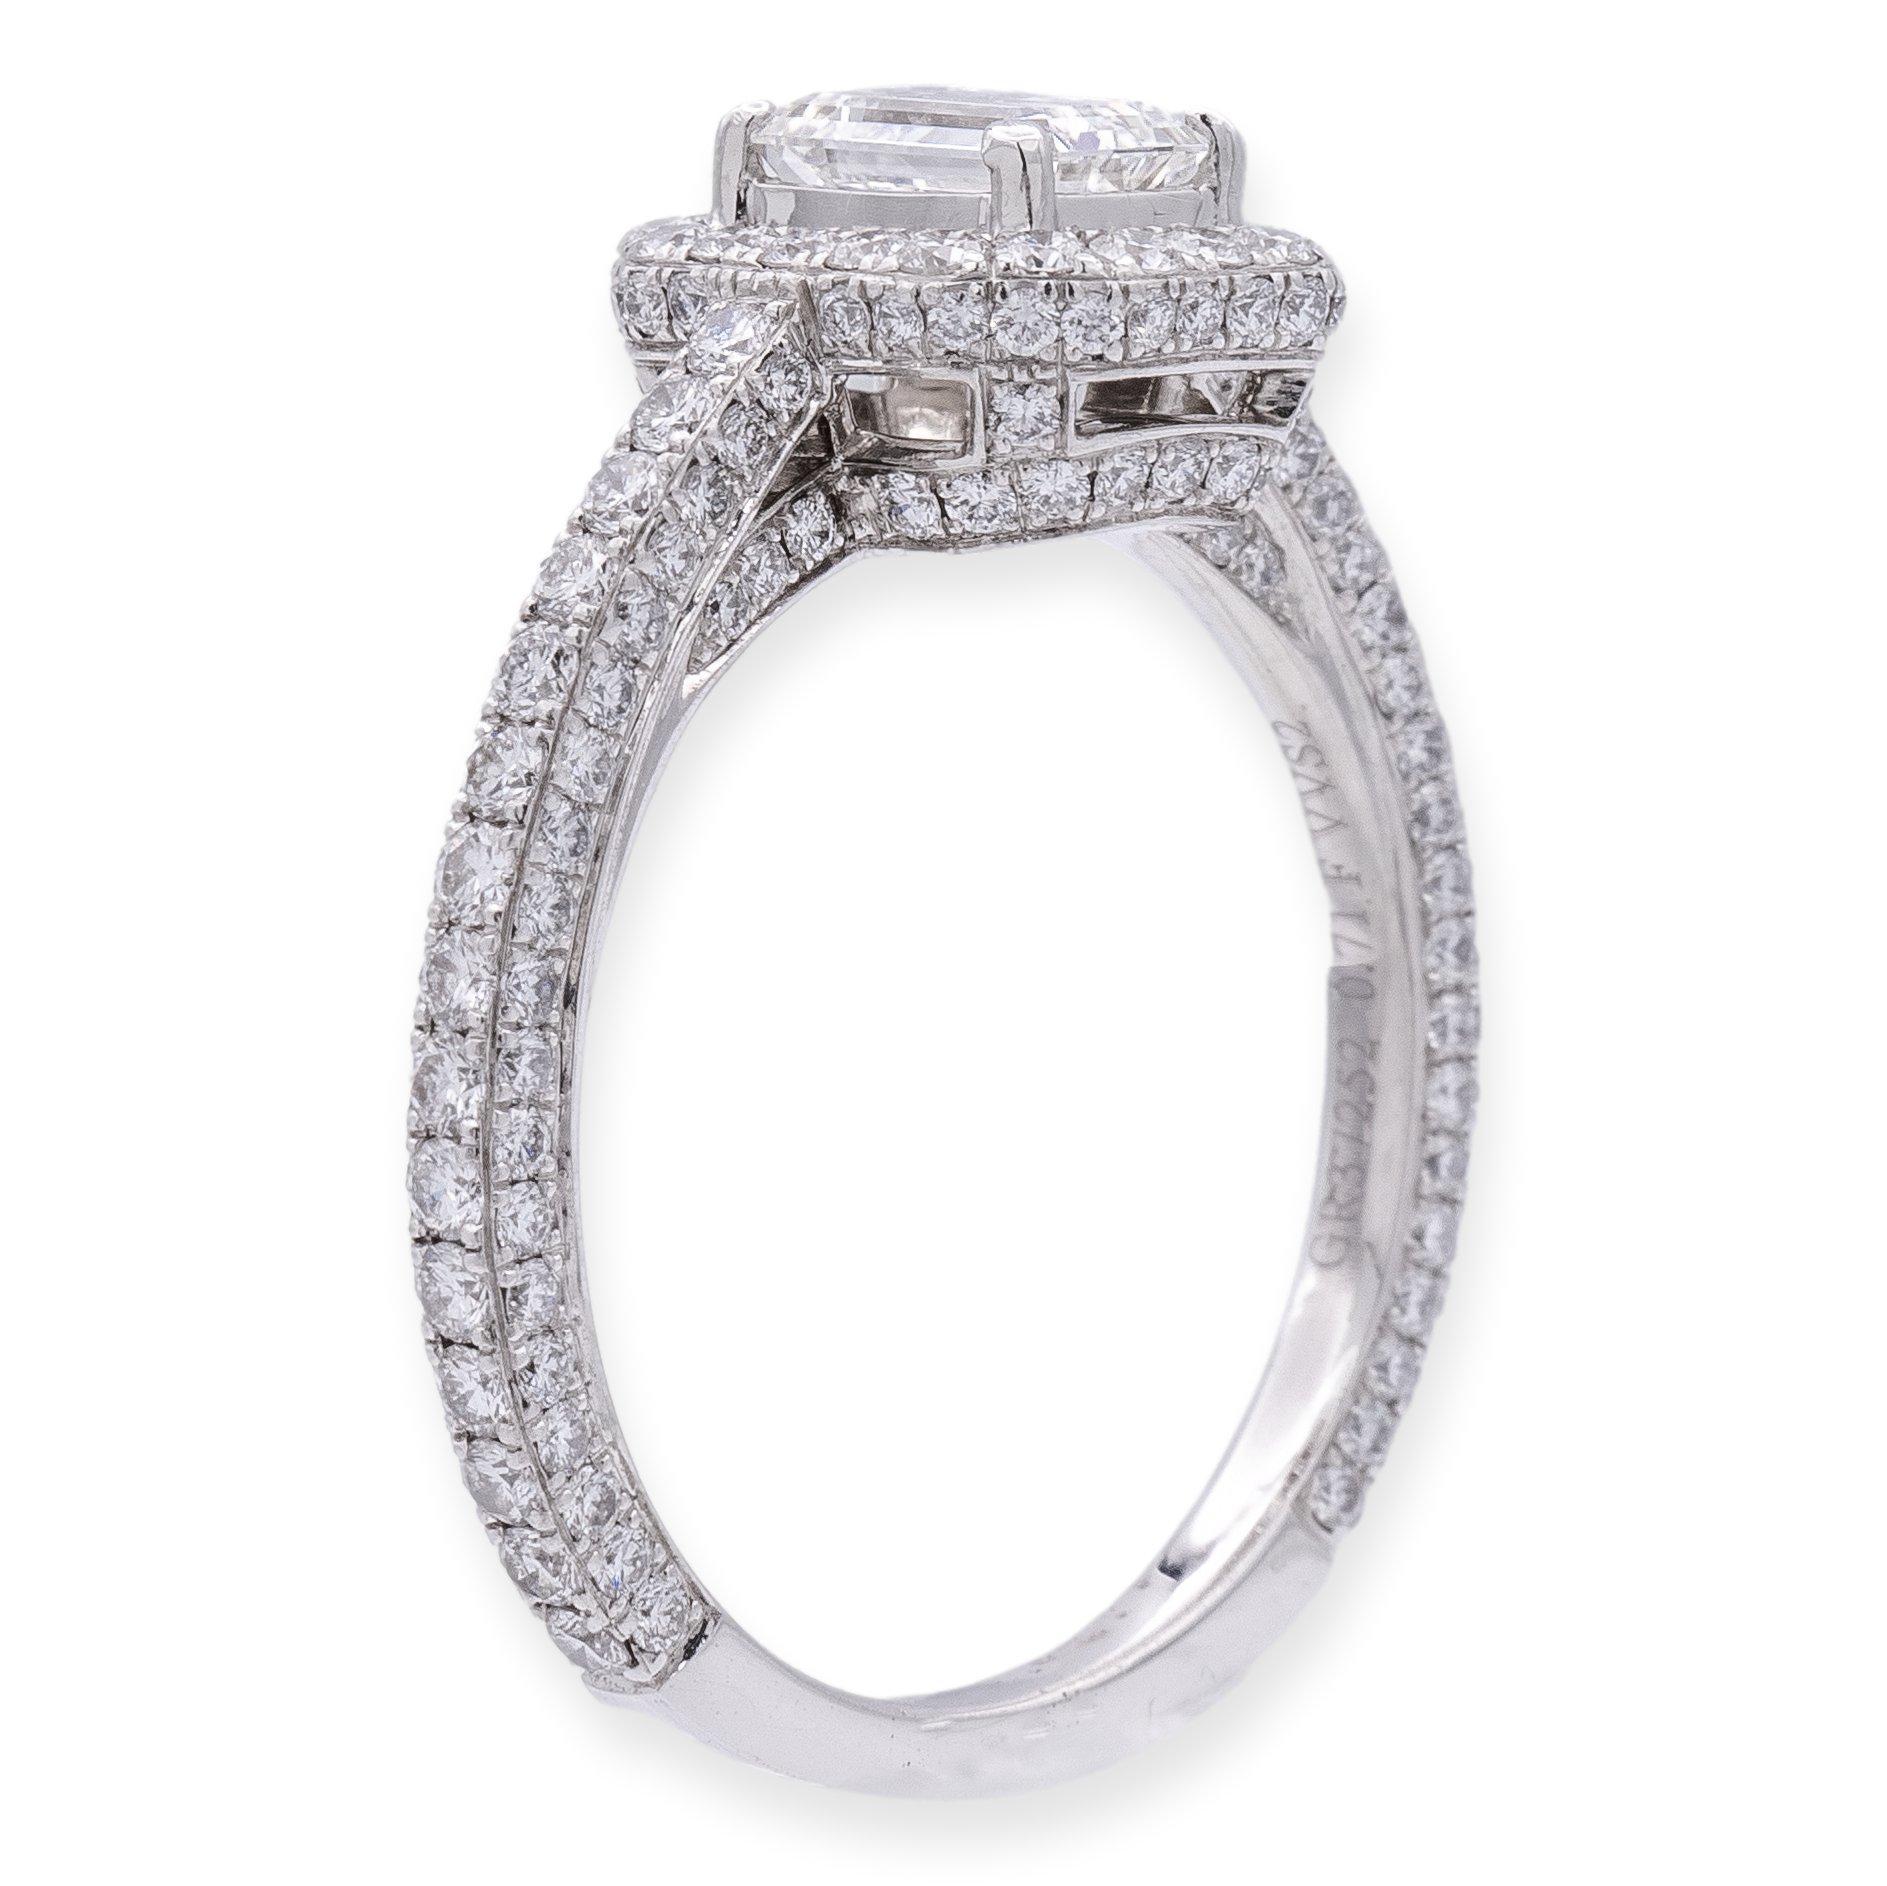 Graff diamond engagement ring from the Constellation collection. Meticulously fashioned from 18k white gold, this ring showcases a central .71 carat emerald cut diamond of impeccable F color and VS1 clarity, certified by the Gemological Institute of